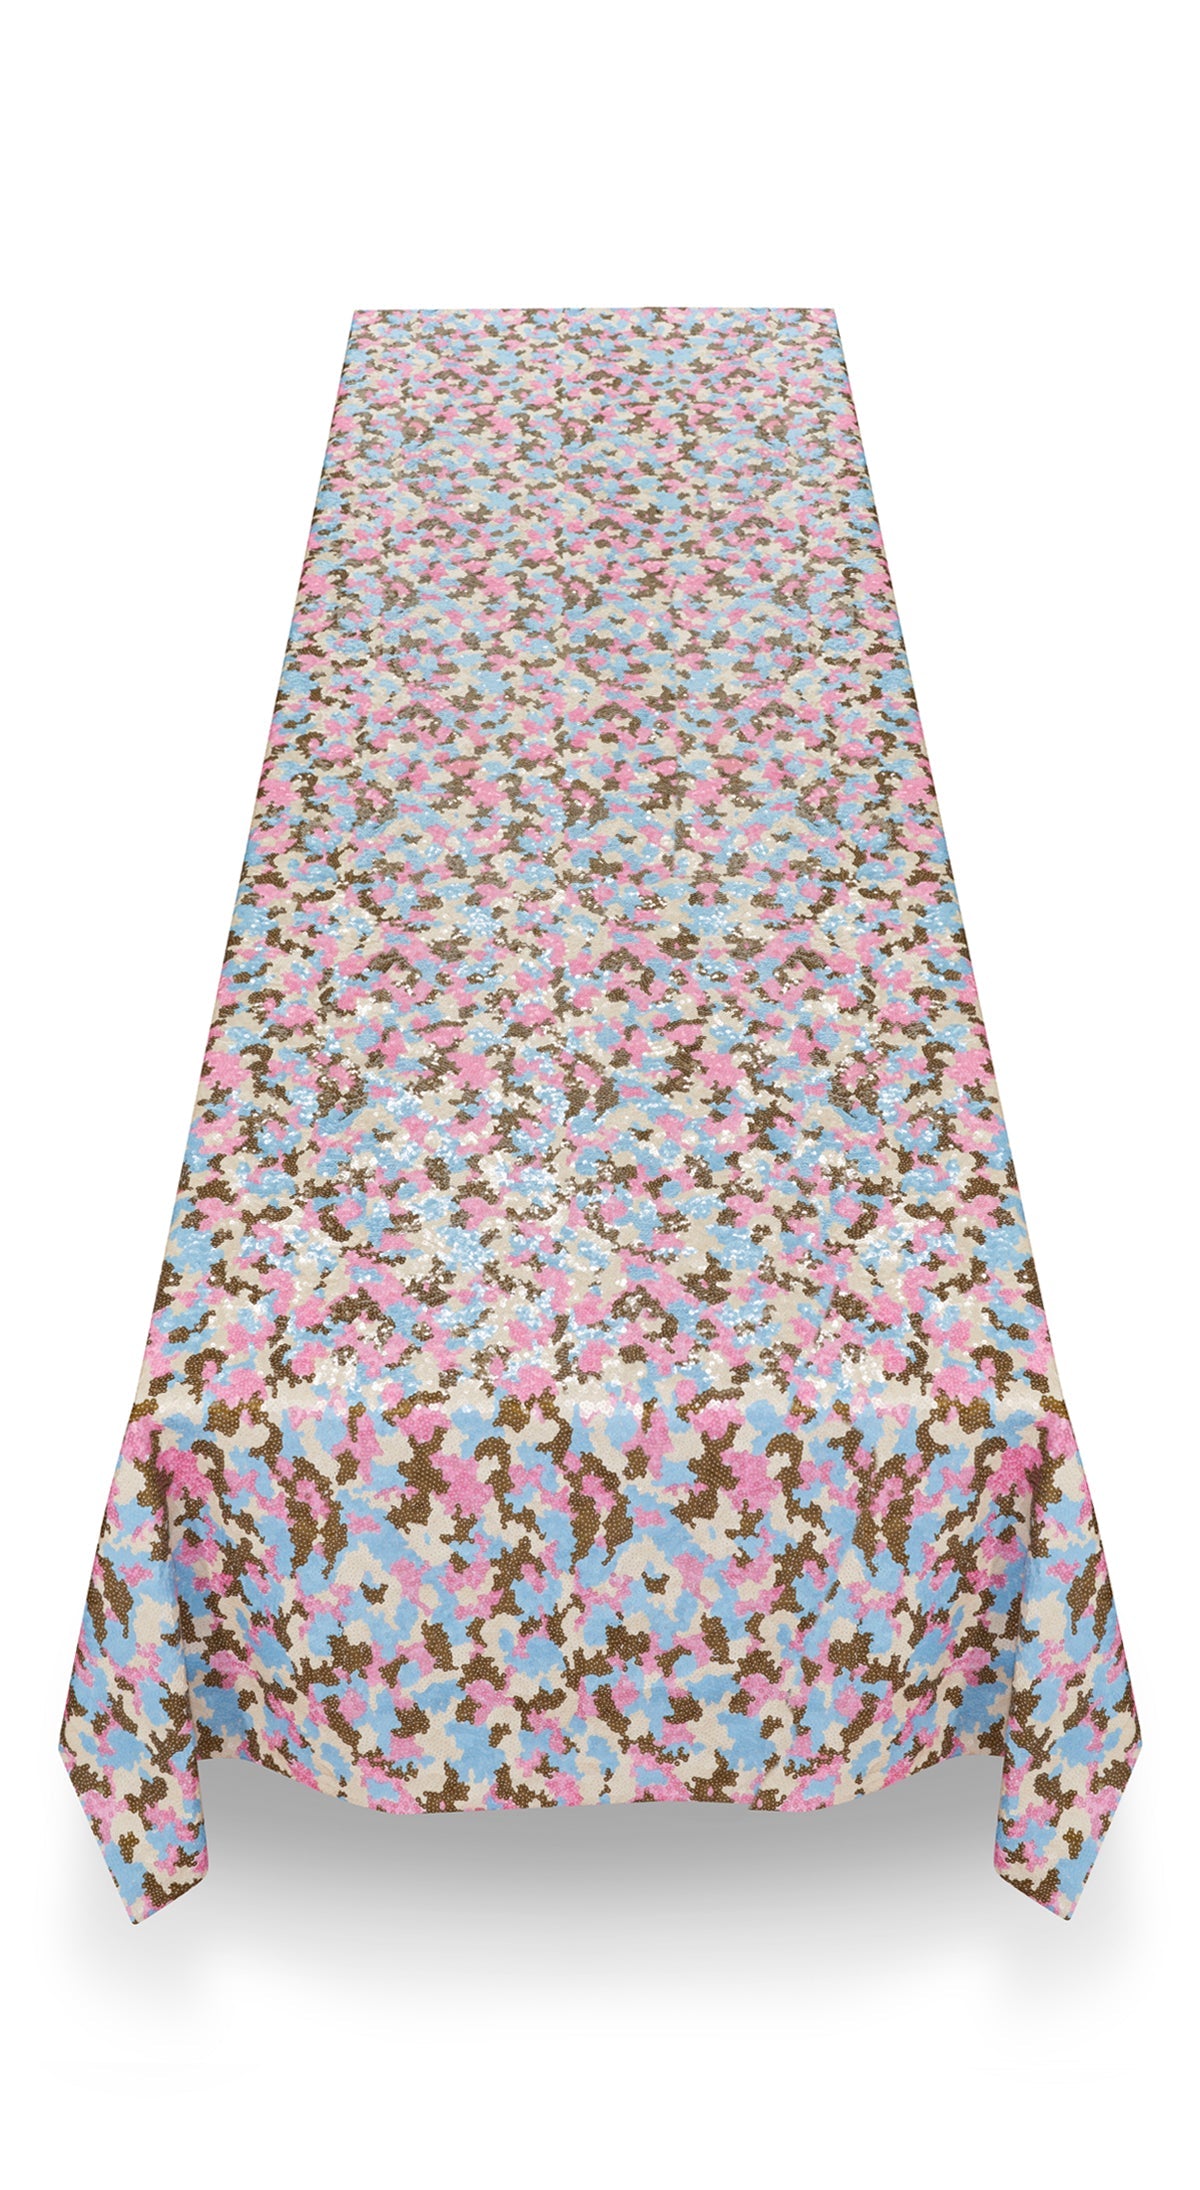 S&B Couture: 'London Plane' Sequin Table Gown in Pink, Khaki, Blue and White